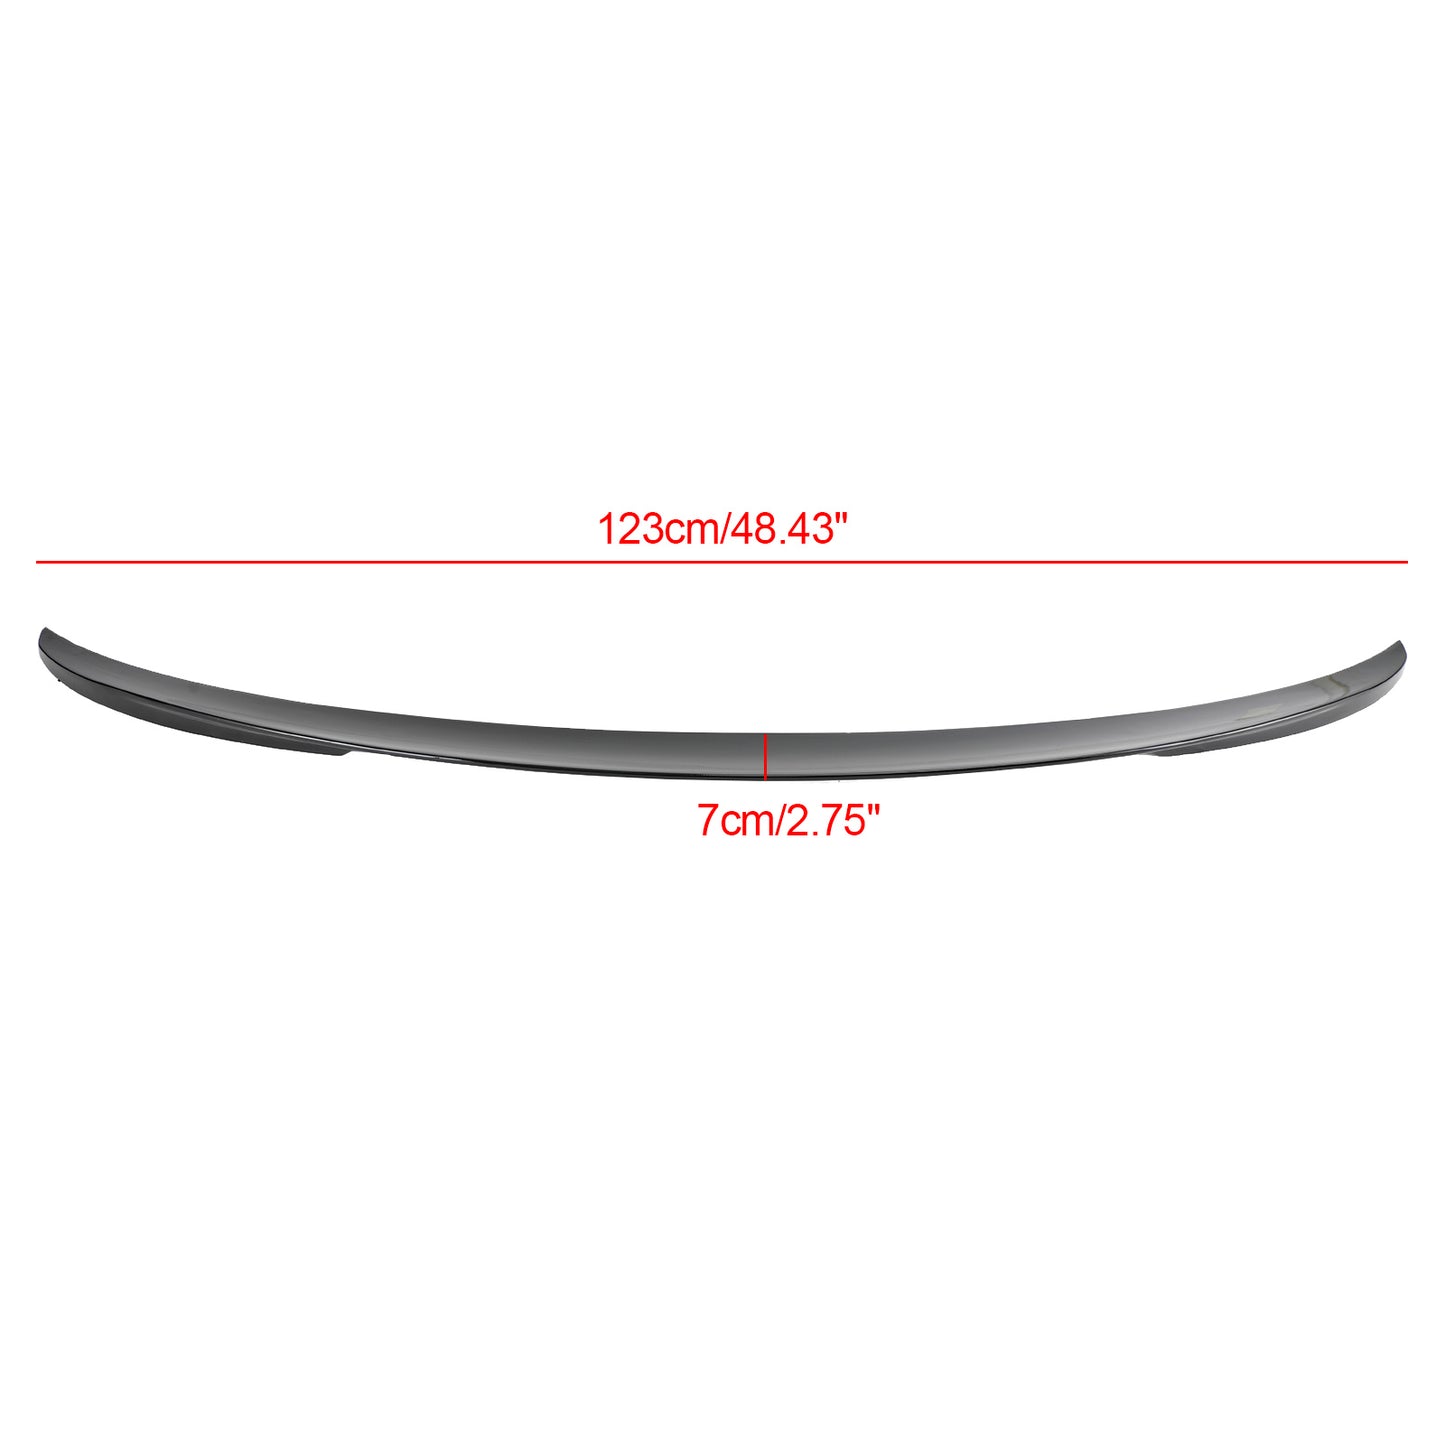 P Style Rear Trunk Spoiler Wing Fit BMW 3 Series F30 F35 2012-2019 Gloss Black